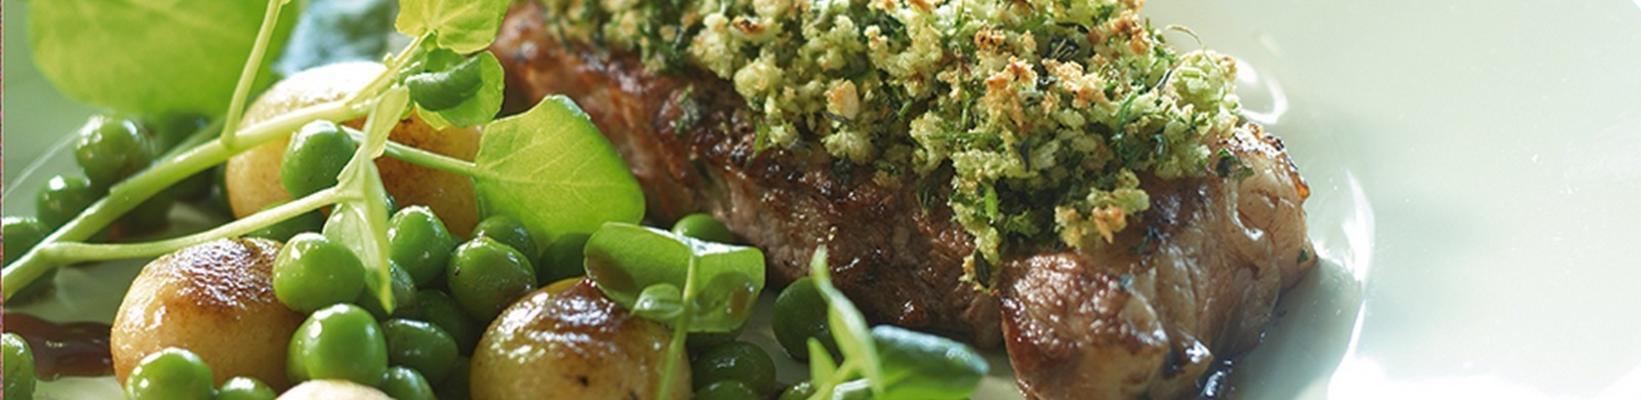 veal entrecote with herb crust, watercress and peas